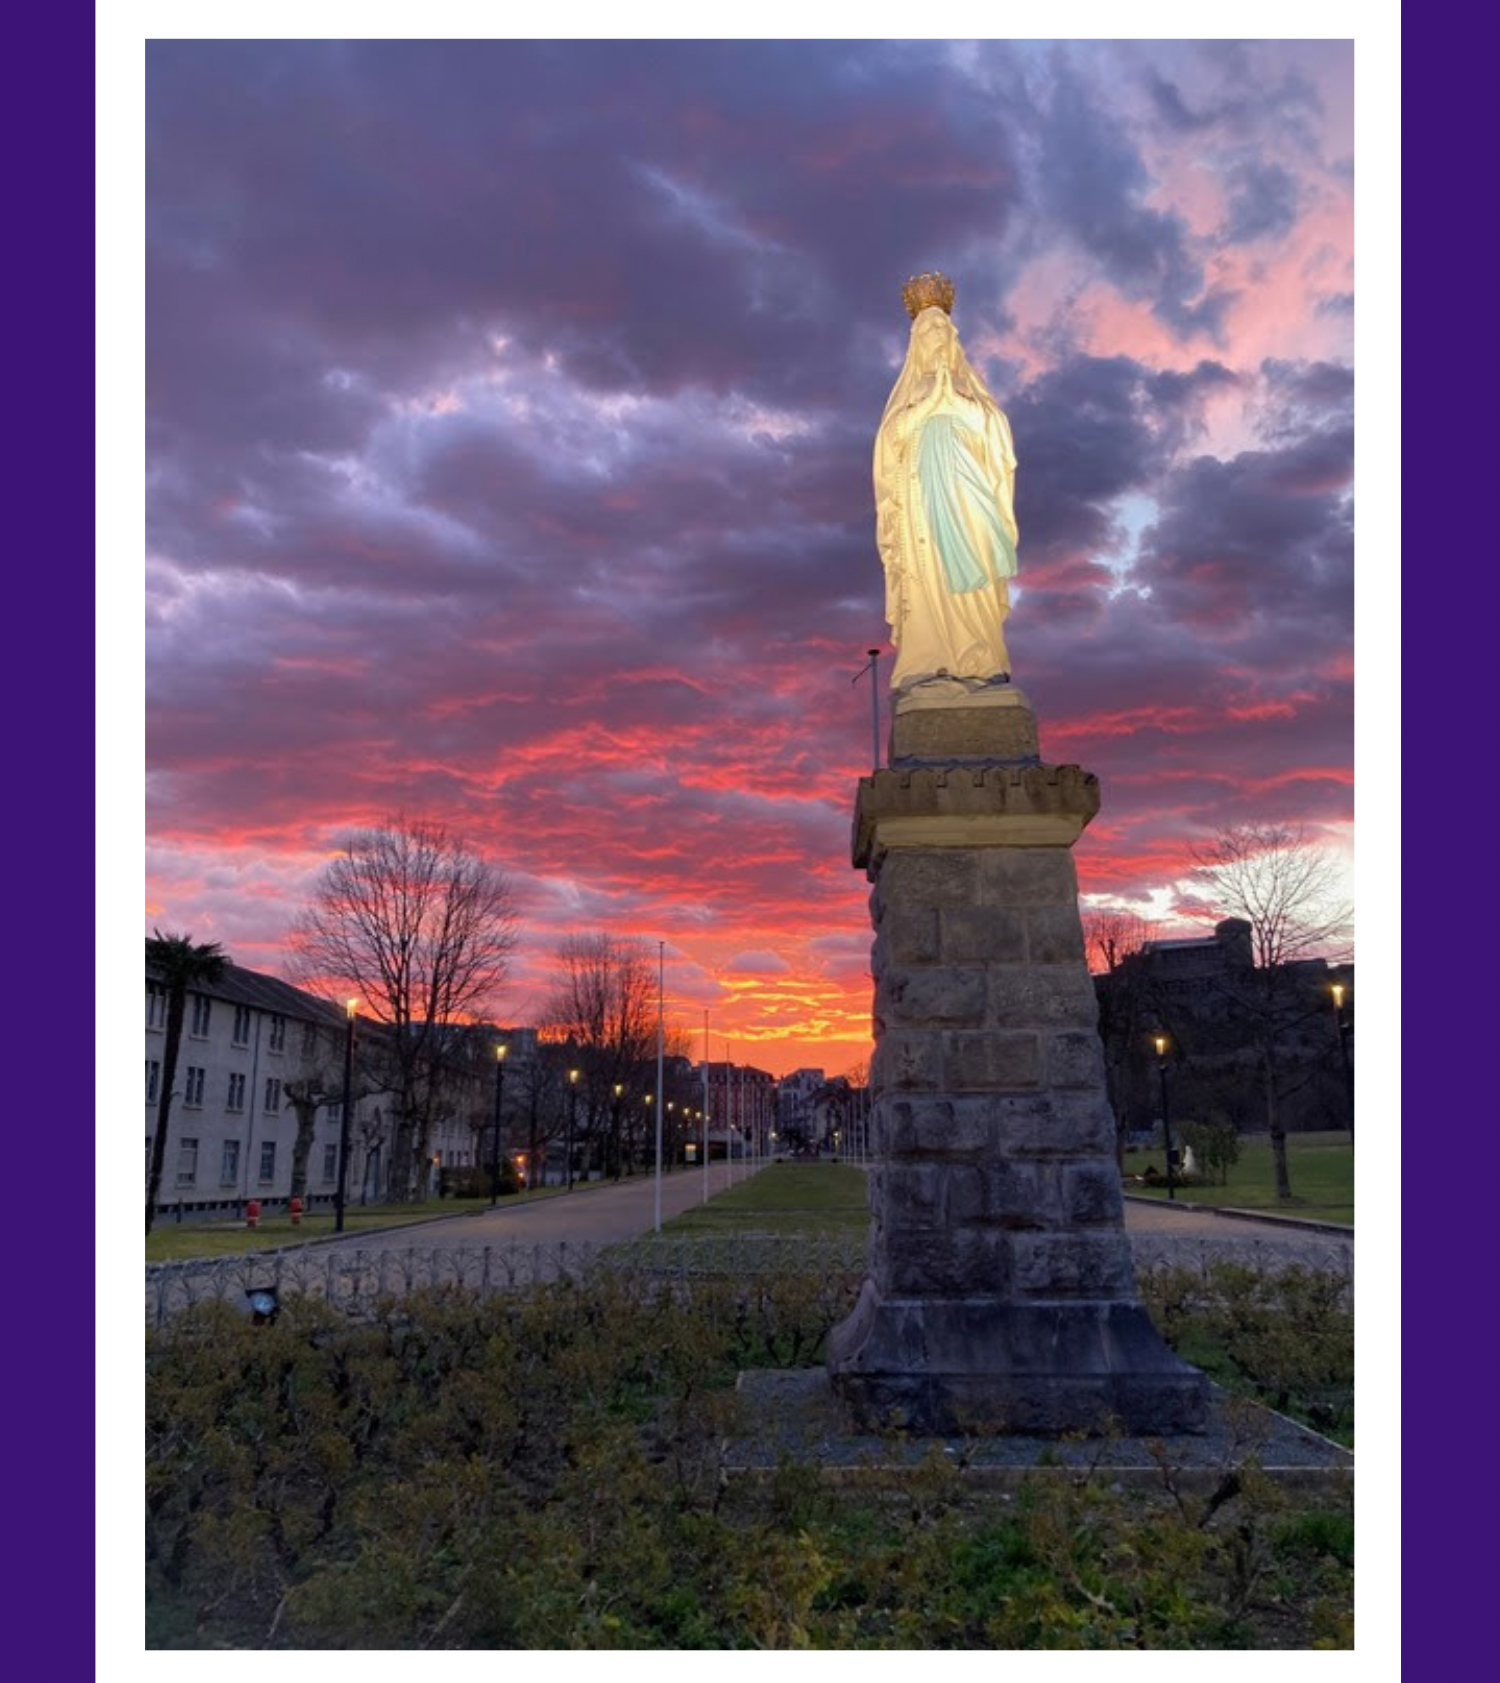 Christian Brothers Academy in Syracuse, NY alumni visits Lourdes. Beautiful Sunset over Our Lady of Lourdes.